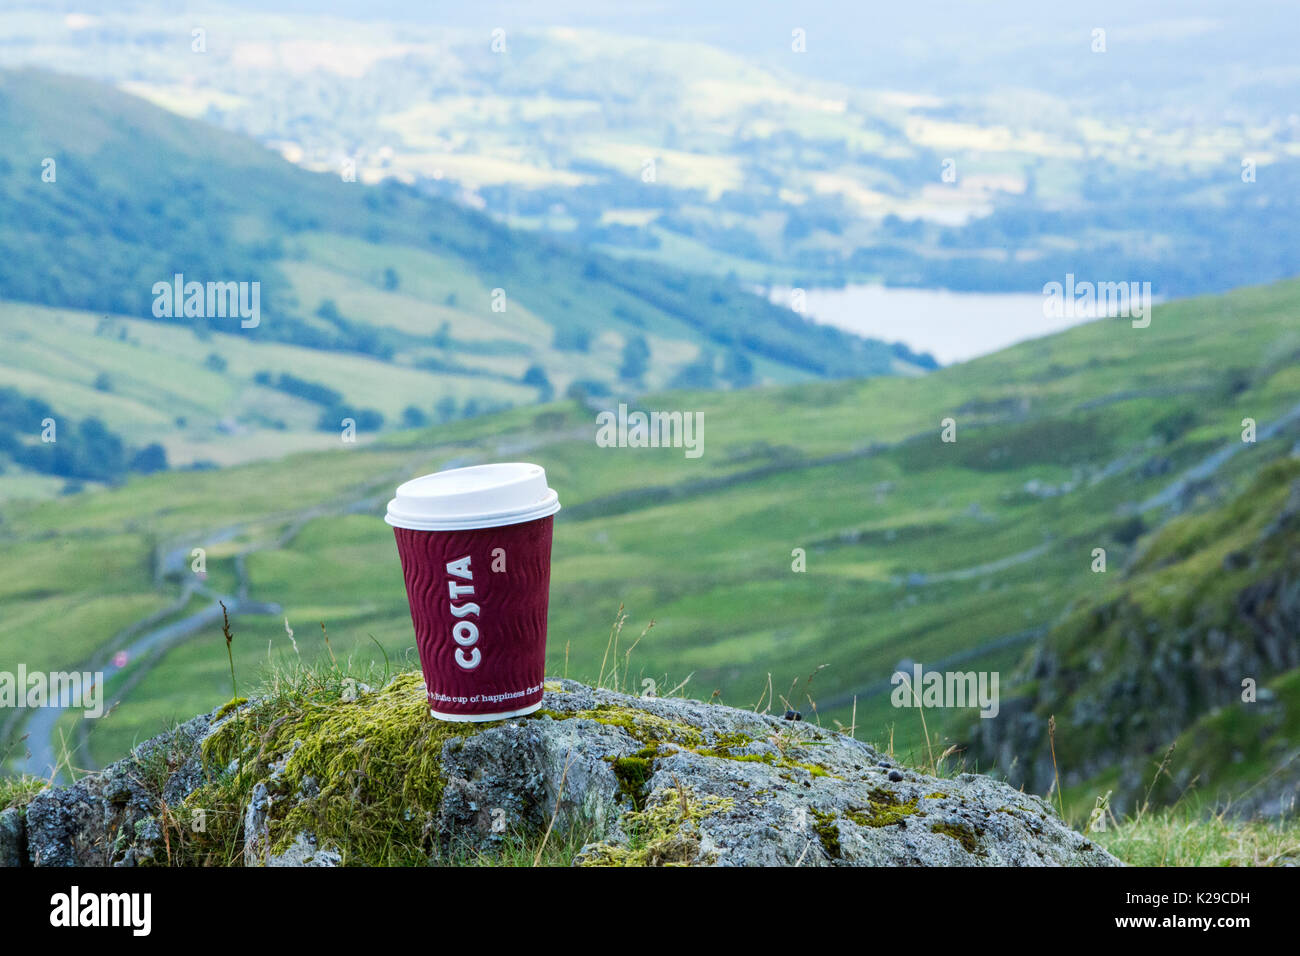 A Costa takeaway coffee cup discarded by some brainless idiot, half way up Red Screes in the Lake District, UK. Stock Photo